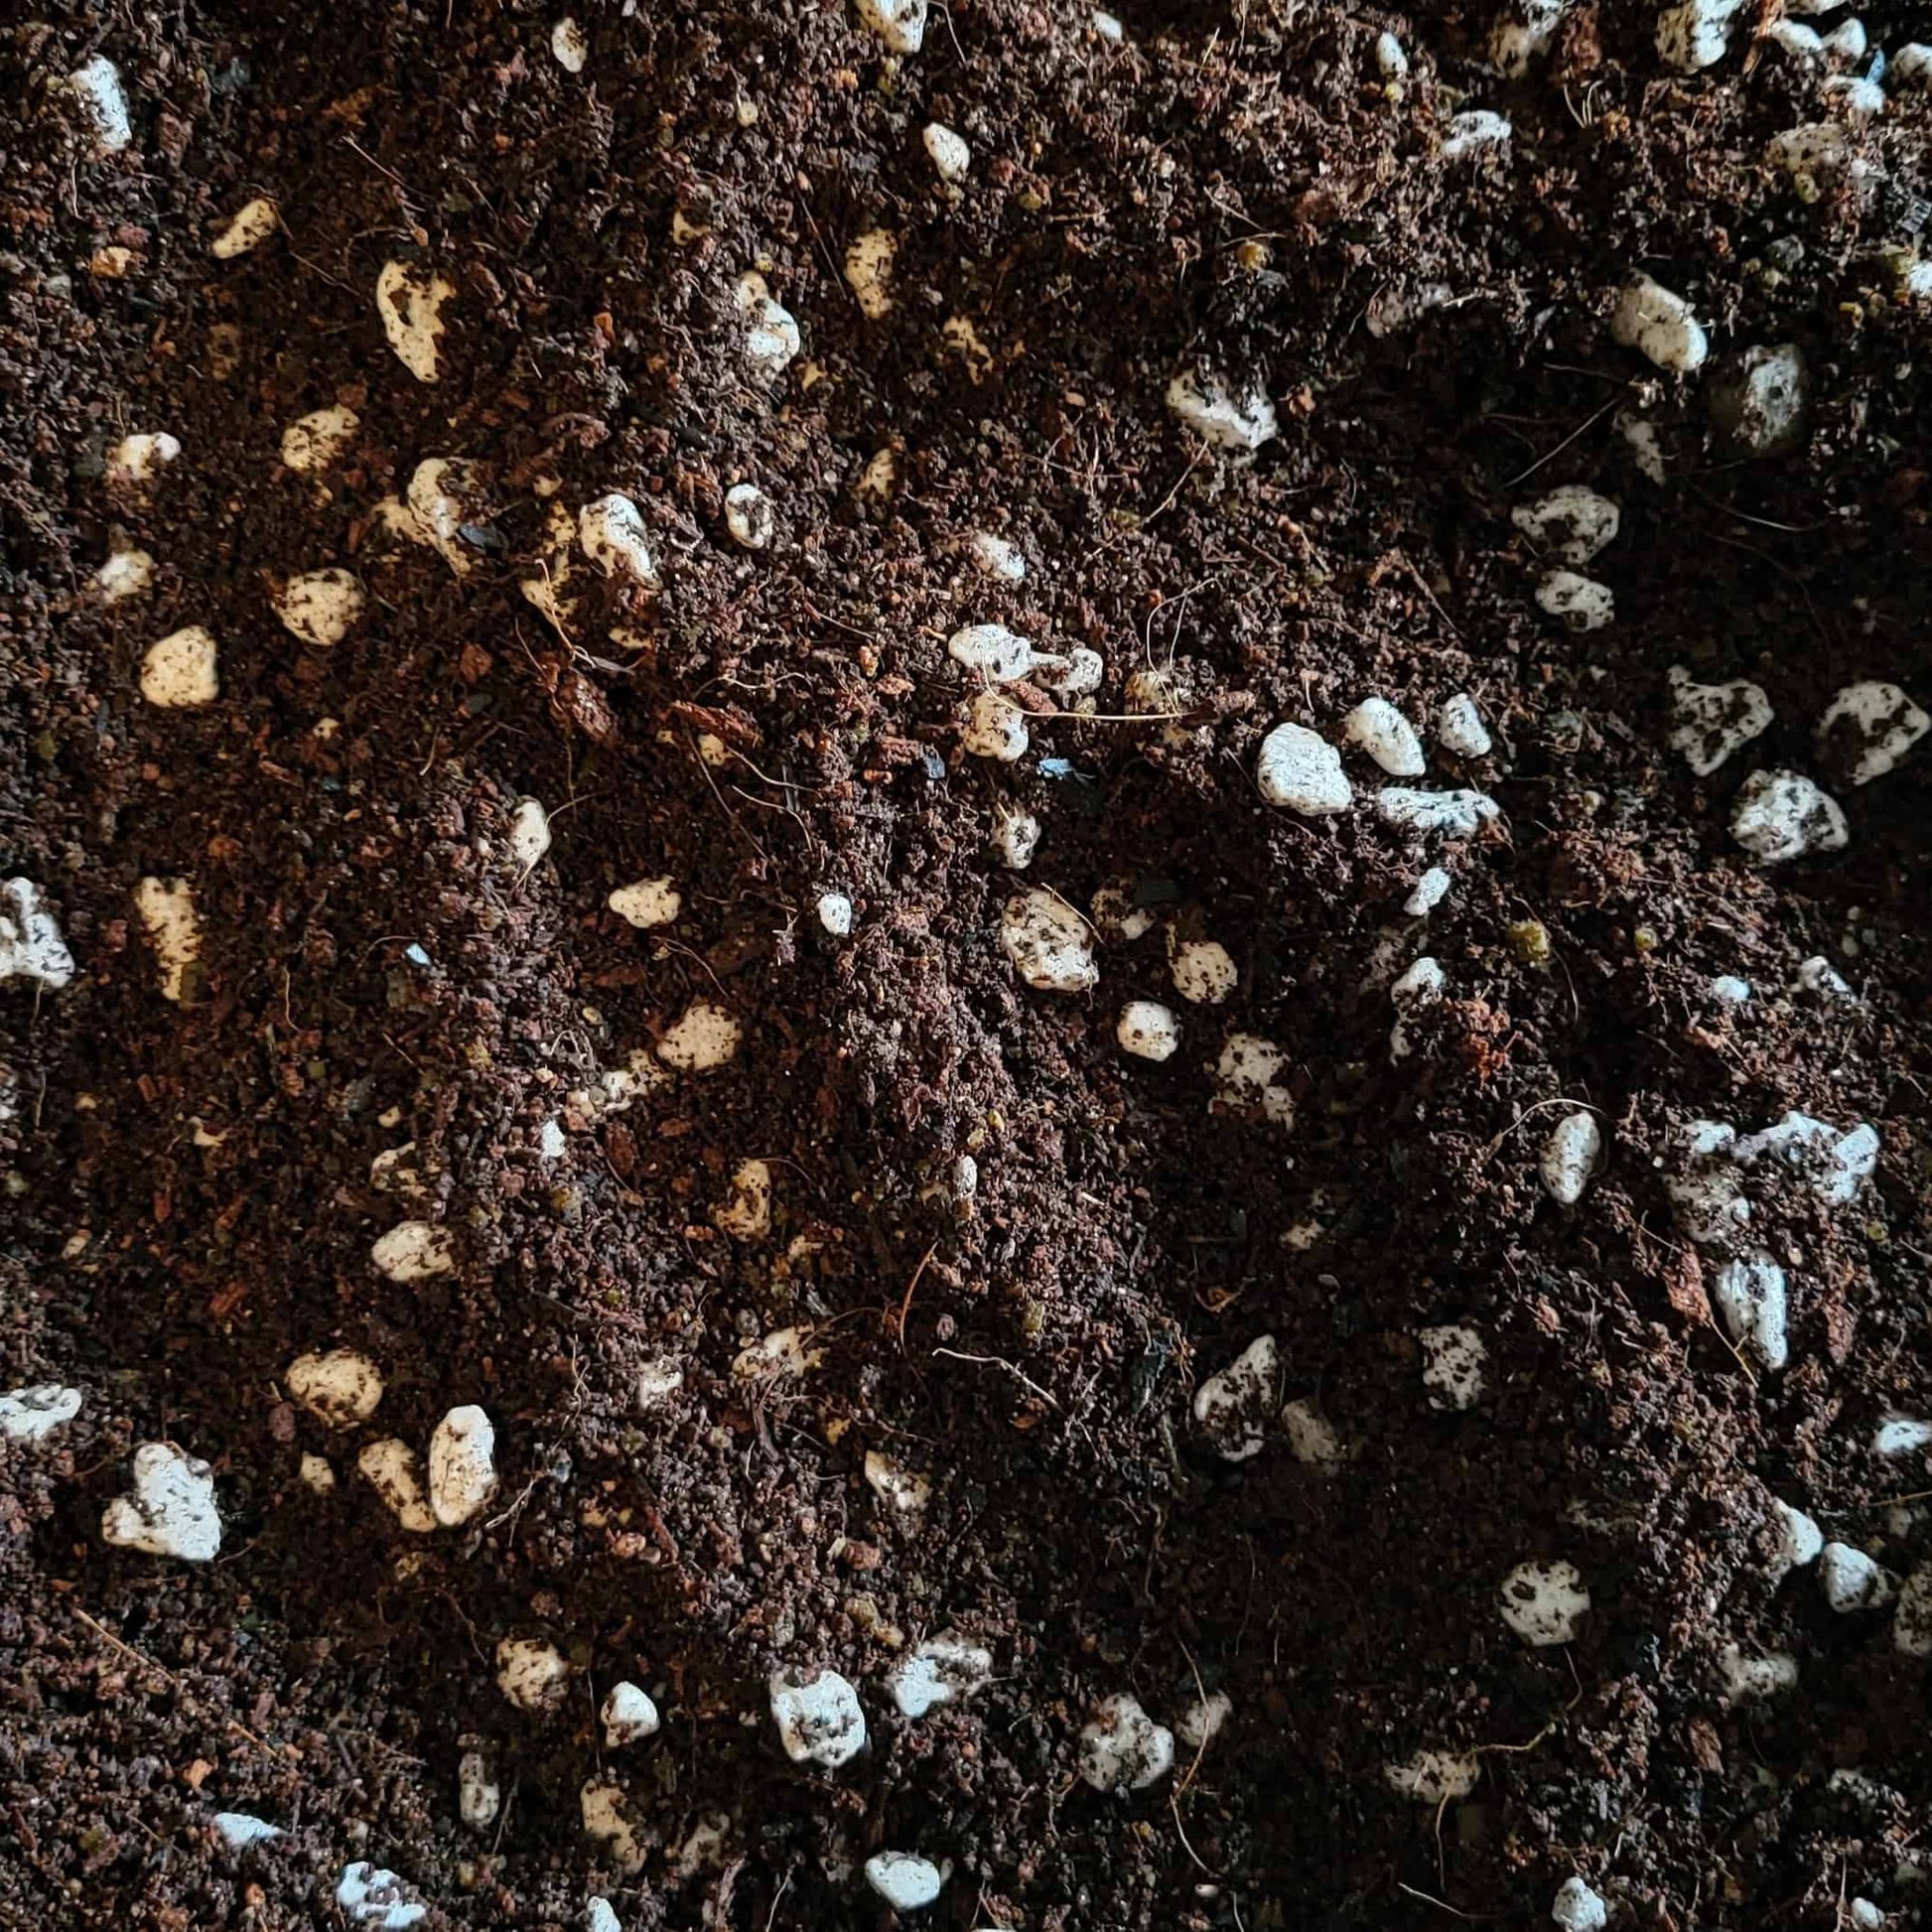 Close up shot of our organic potting soil. You can see the buffered coco coir, reusable pumice, and beautiful dark color of our worm castings!